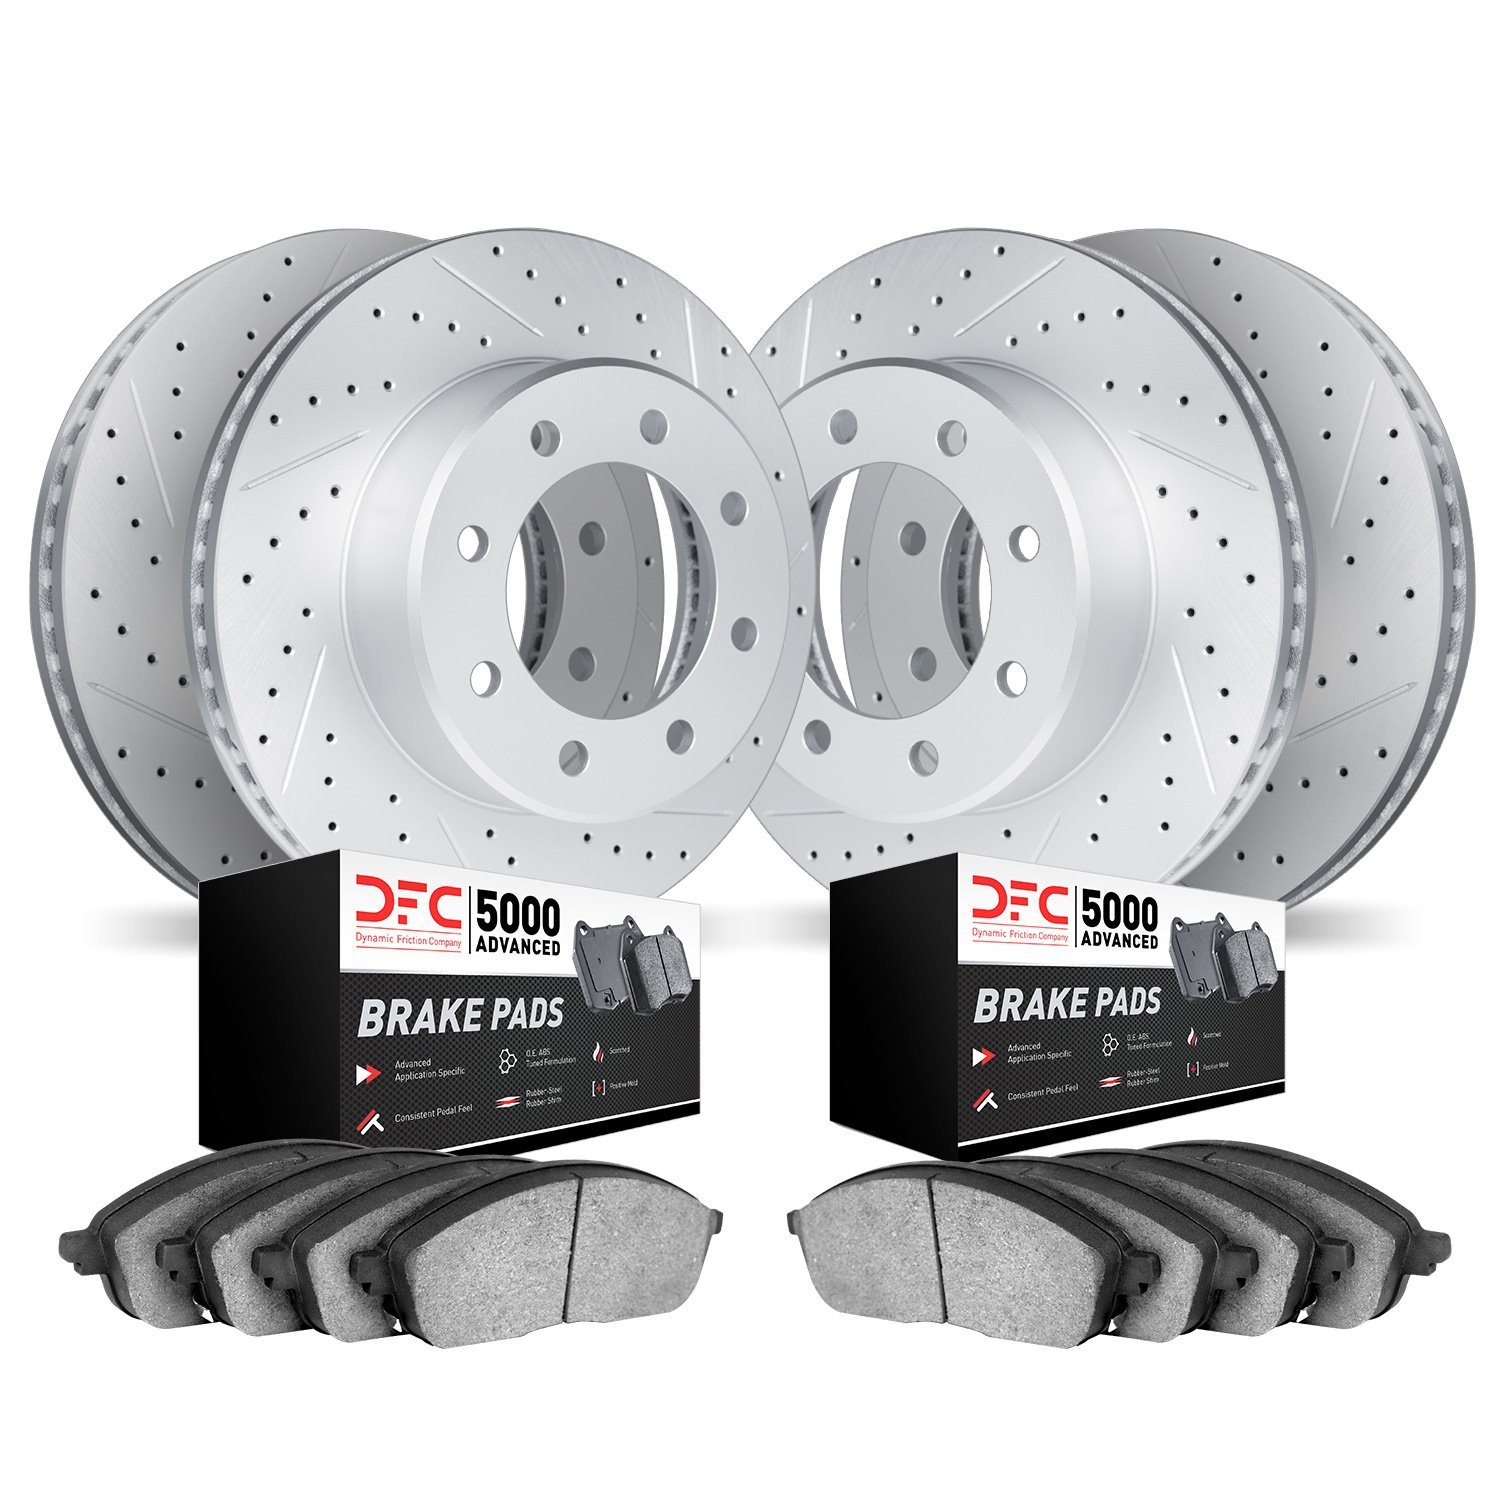 2504-54253 Geoperformance Drilled/Slotted Rotors w/5000 Advanced Brake Pads Kit, 2003-2005 Ford/Lincoln/Mercury/Mazda, Position: